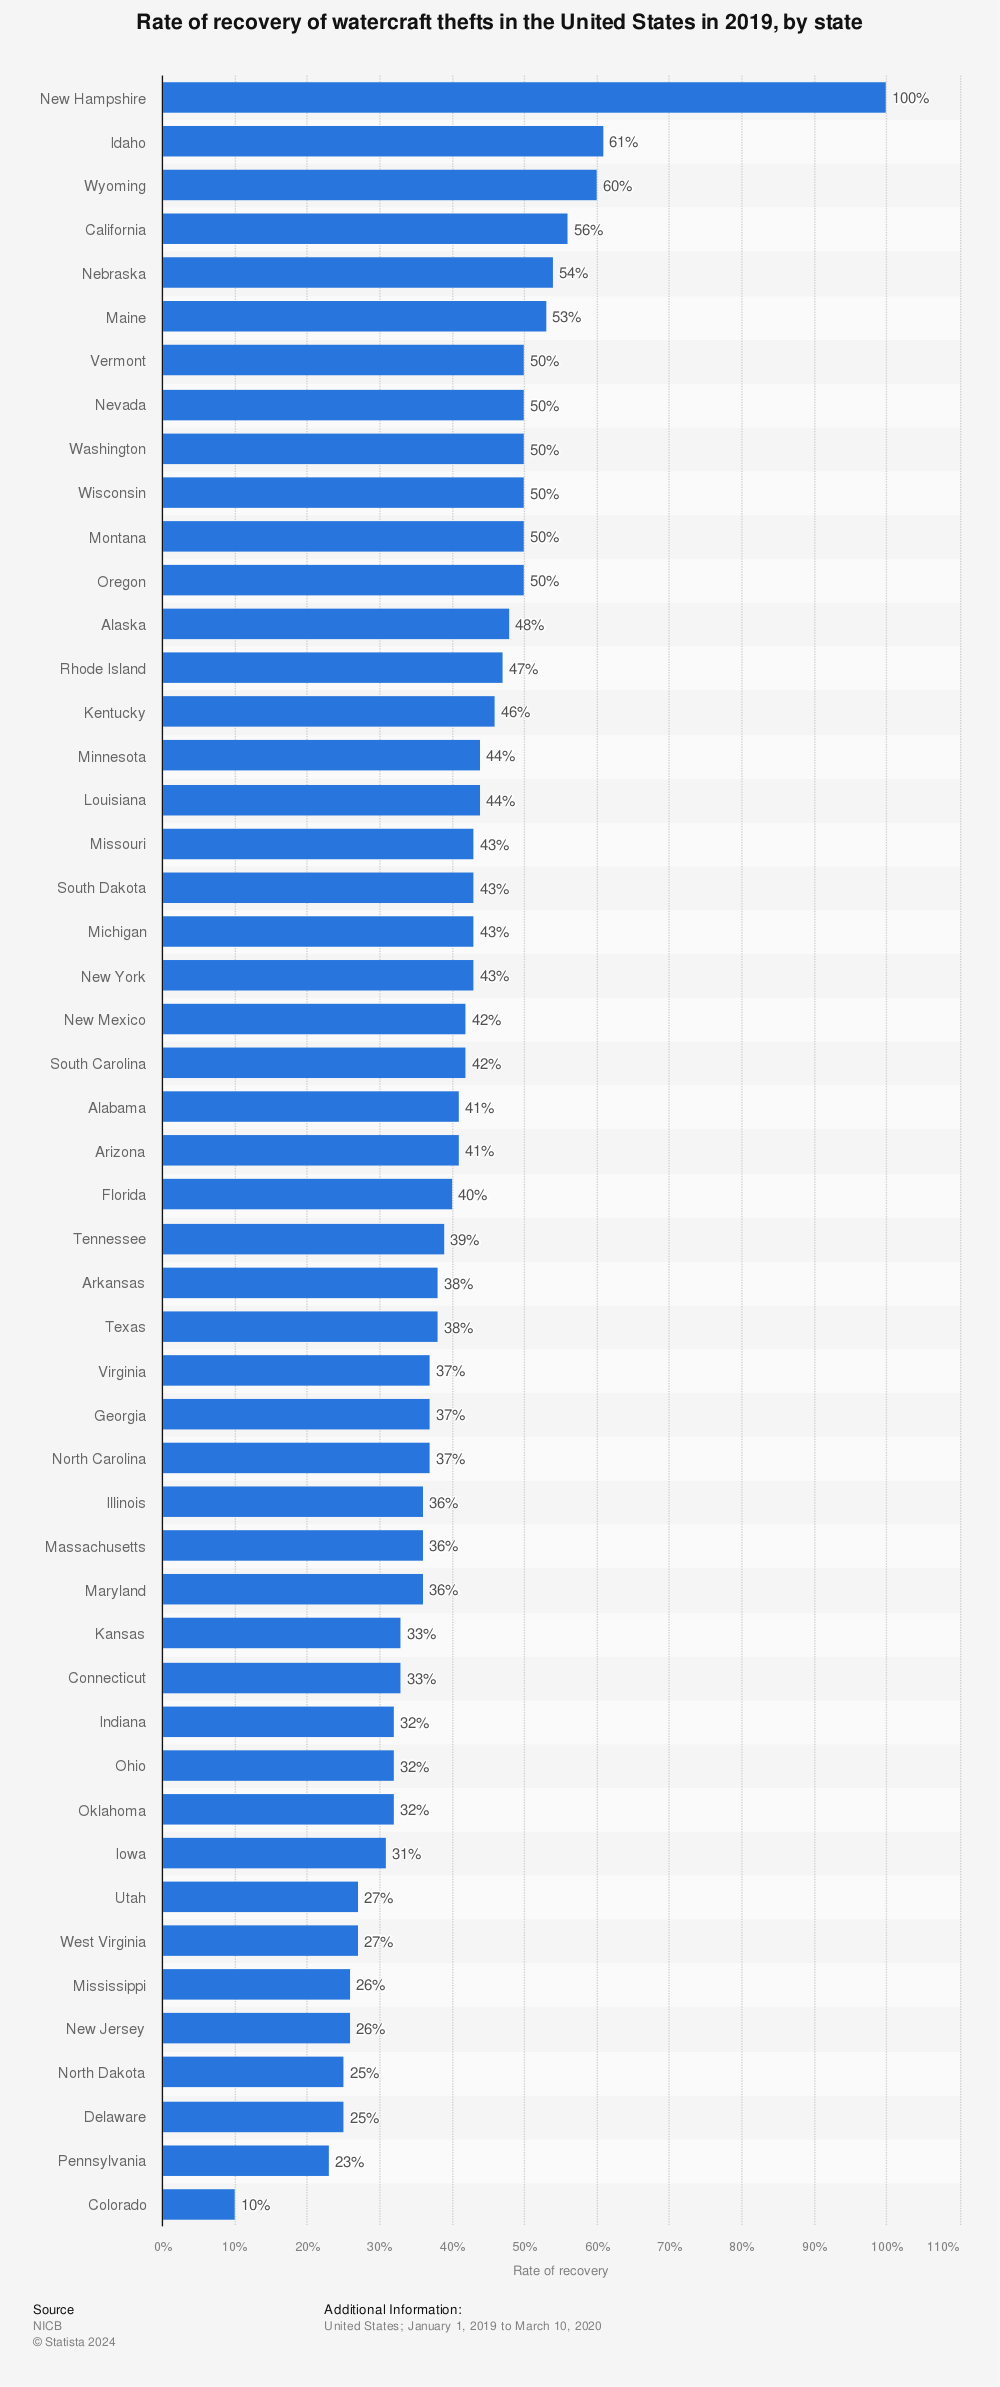 Statistic: Rate of recovery of watercraft thefts in the United States in 2019, by state | Statista